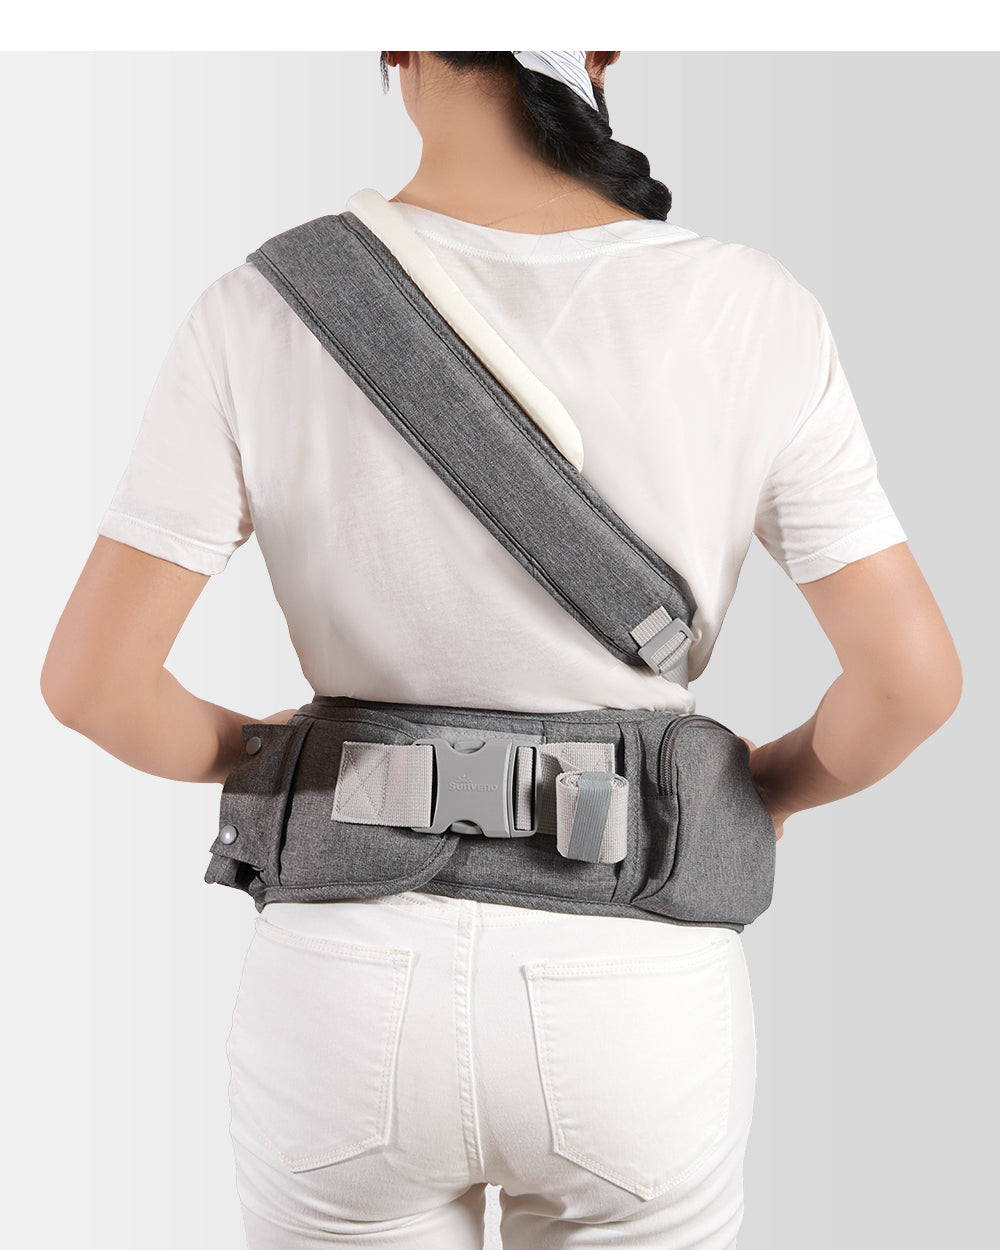 Sunveno One Shoulder Baby Carrier